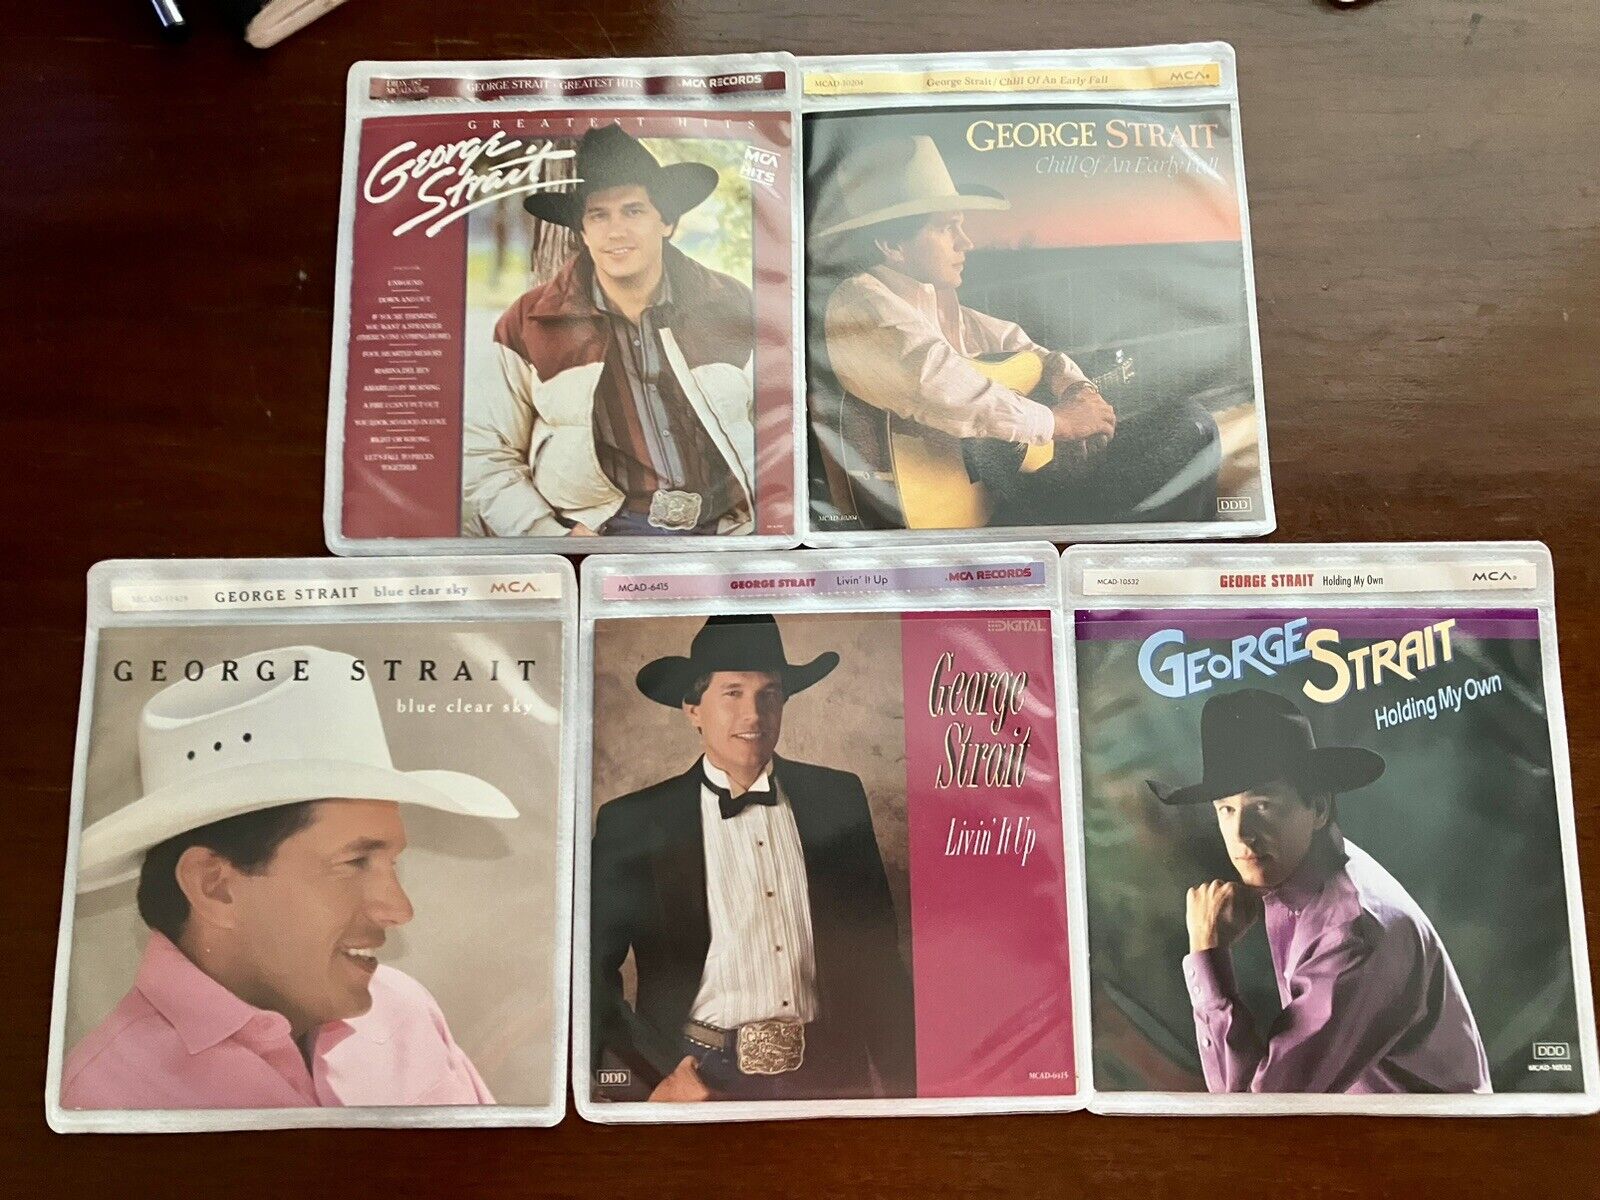 George Strait - Lot 2 of 5 CDs - Like New Mint , see pics , no cases